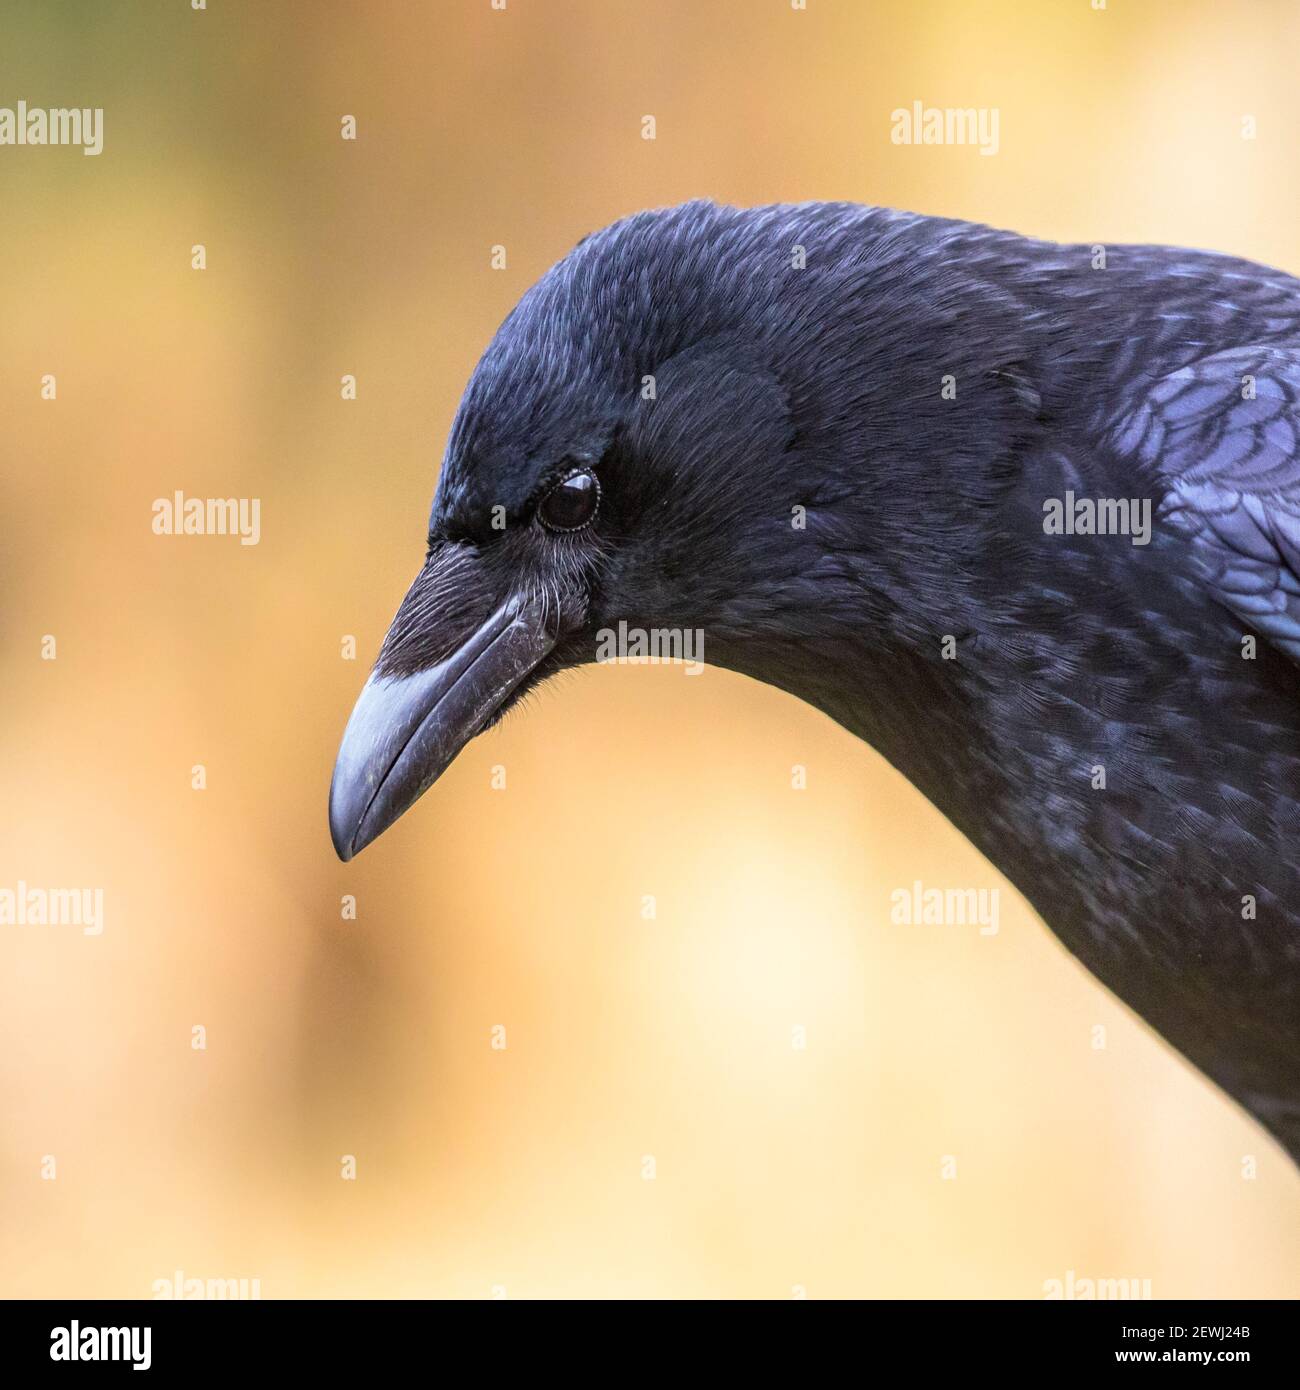 Carrion crow (Corvus corone) black bird portrait of head and looking at camera. Wildlife in nature. Netherlands Stock Photo